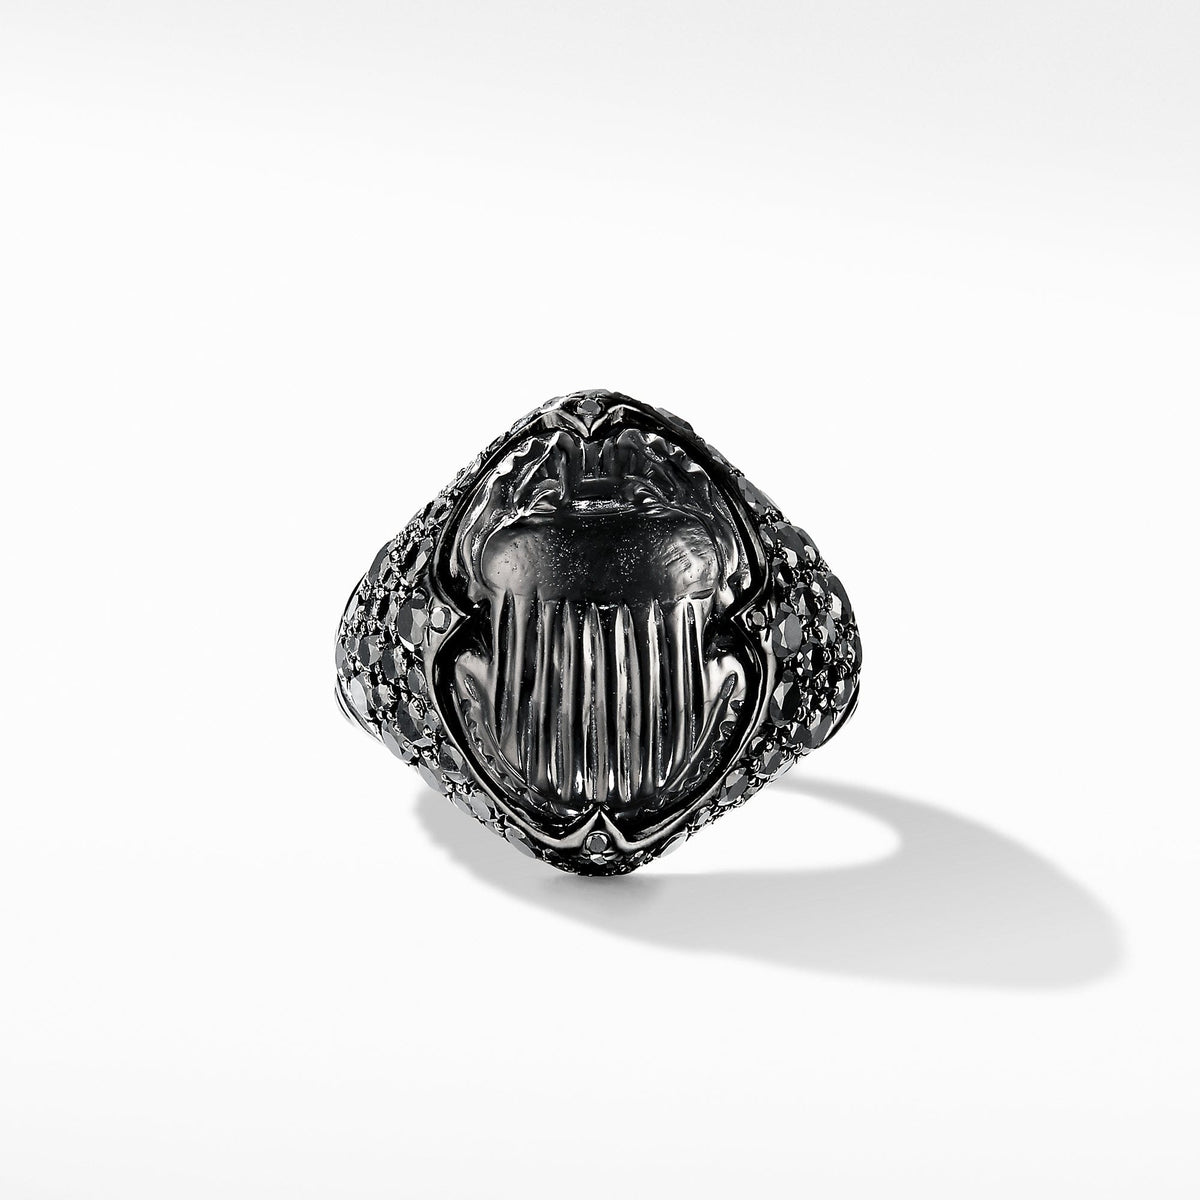 Petrvs Pinky Ring in 18K White Gold with Black Rhodium, Black Onyx and Pavé Black Diamonds, Long's Jewelers